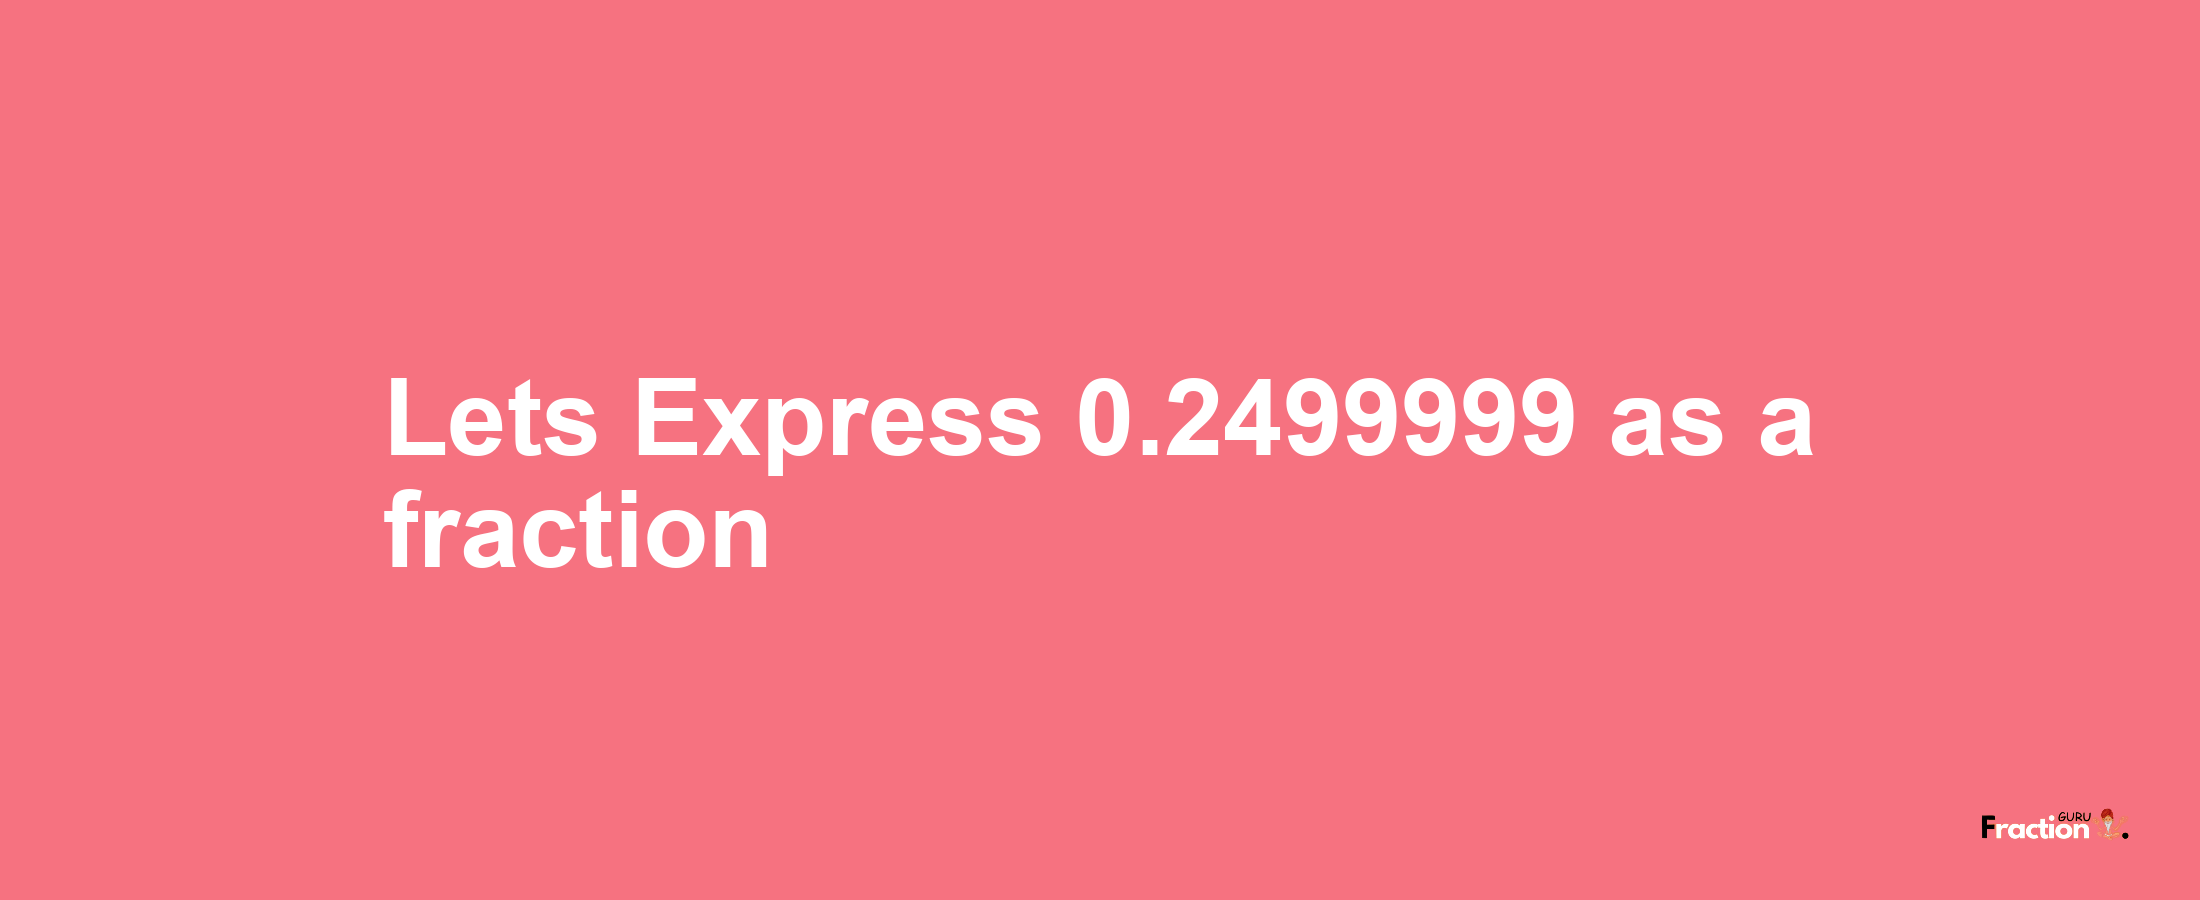 Lets Express 0.2499999 as afraction